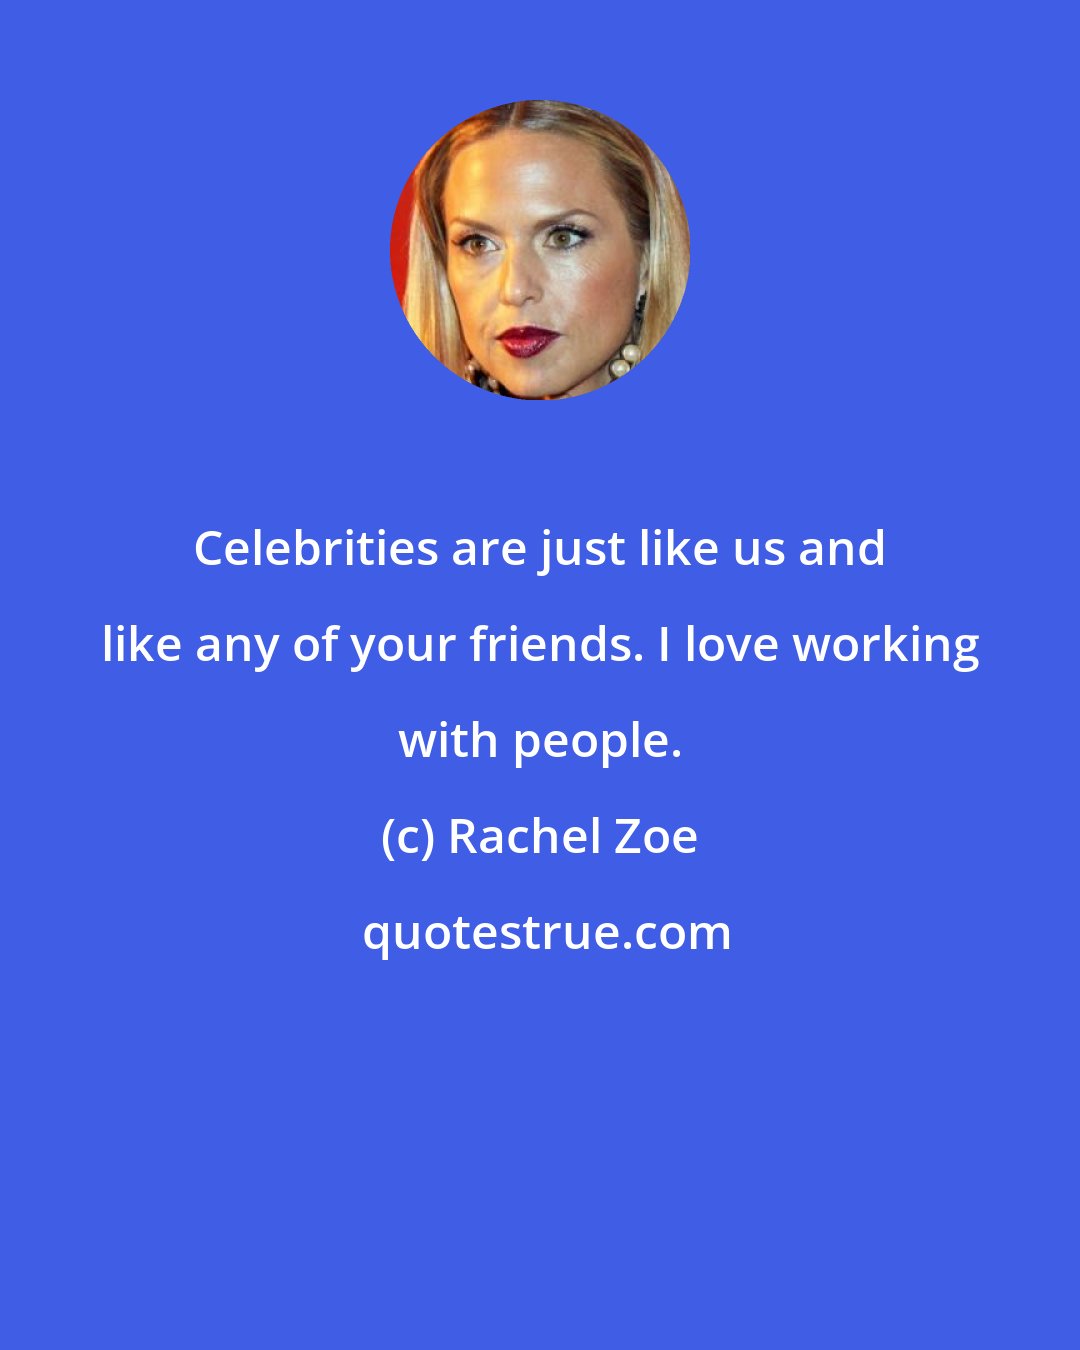 Rachel Zoe: Celebrities are just like us and like any of your friends. I love working with people.